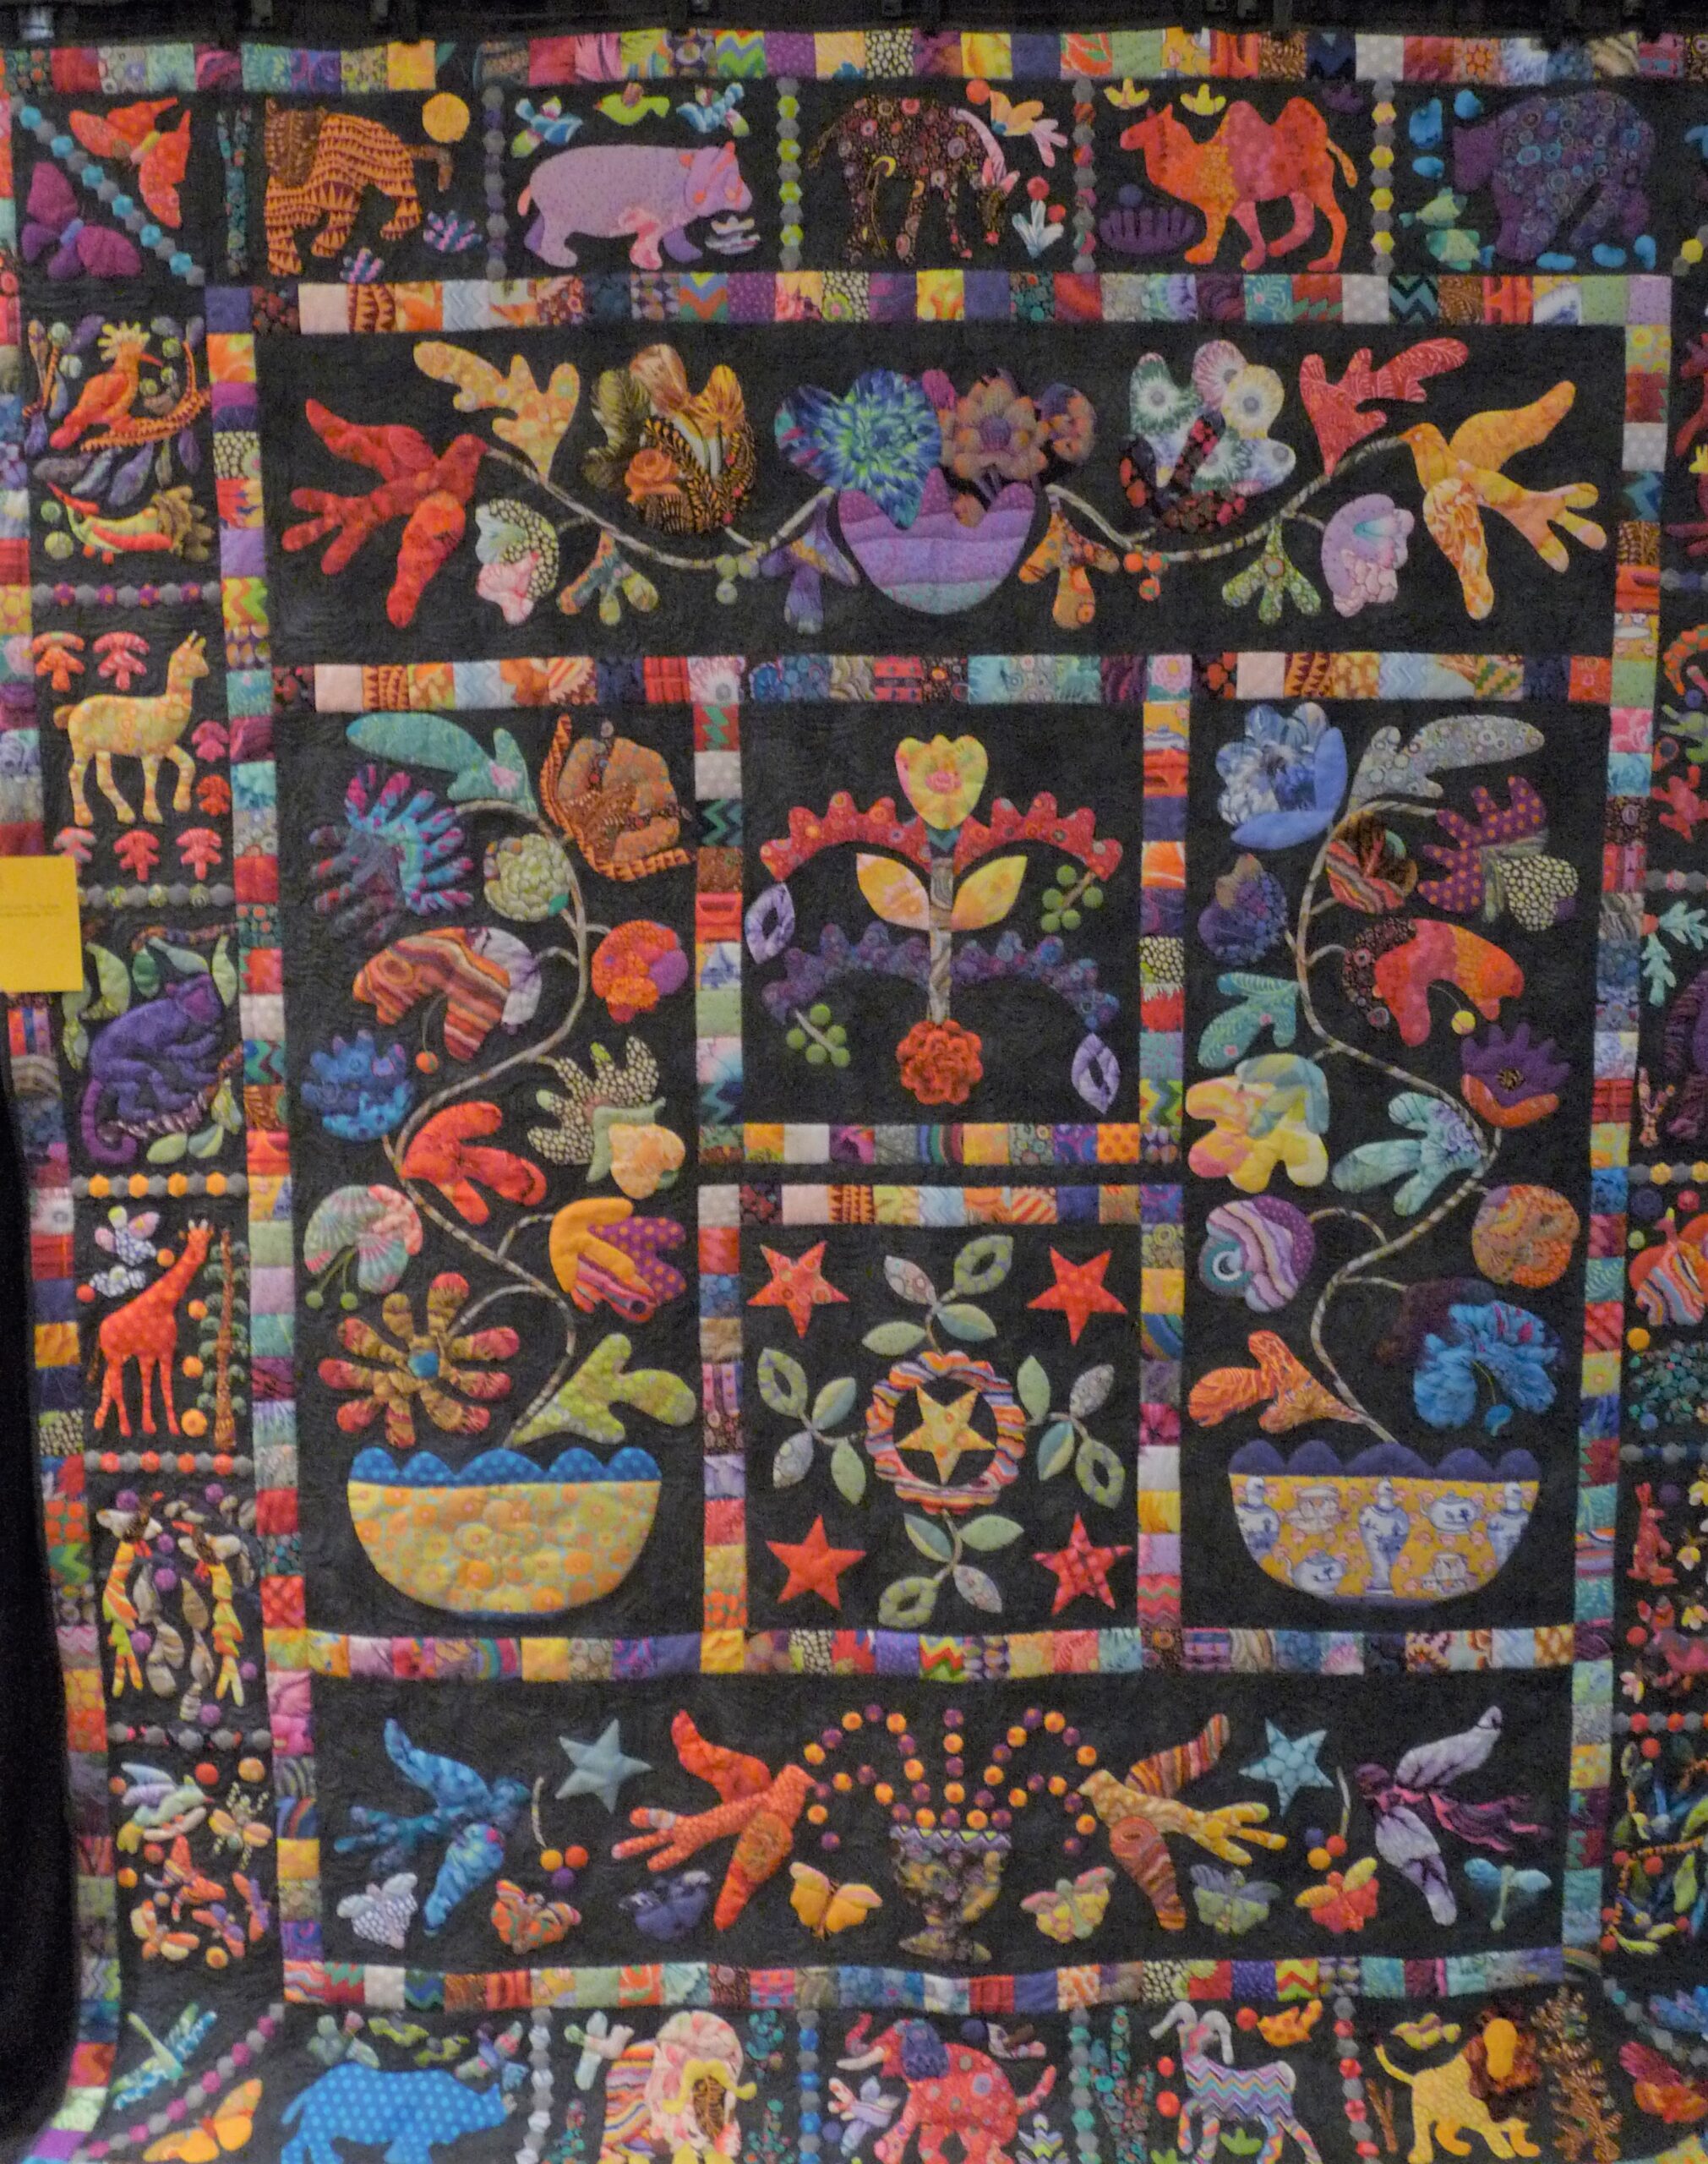 Sandy Koubek: Whimsical Jungle; 1st Place in Large Quilts